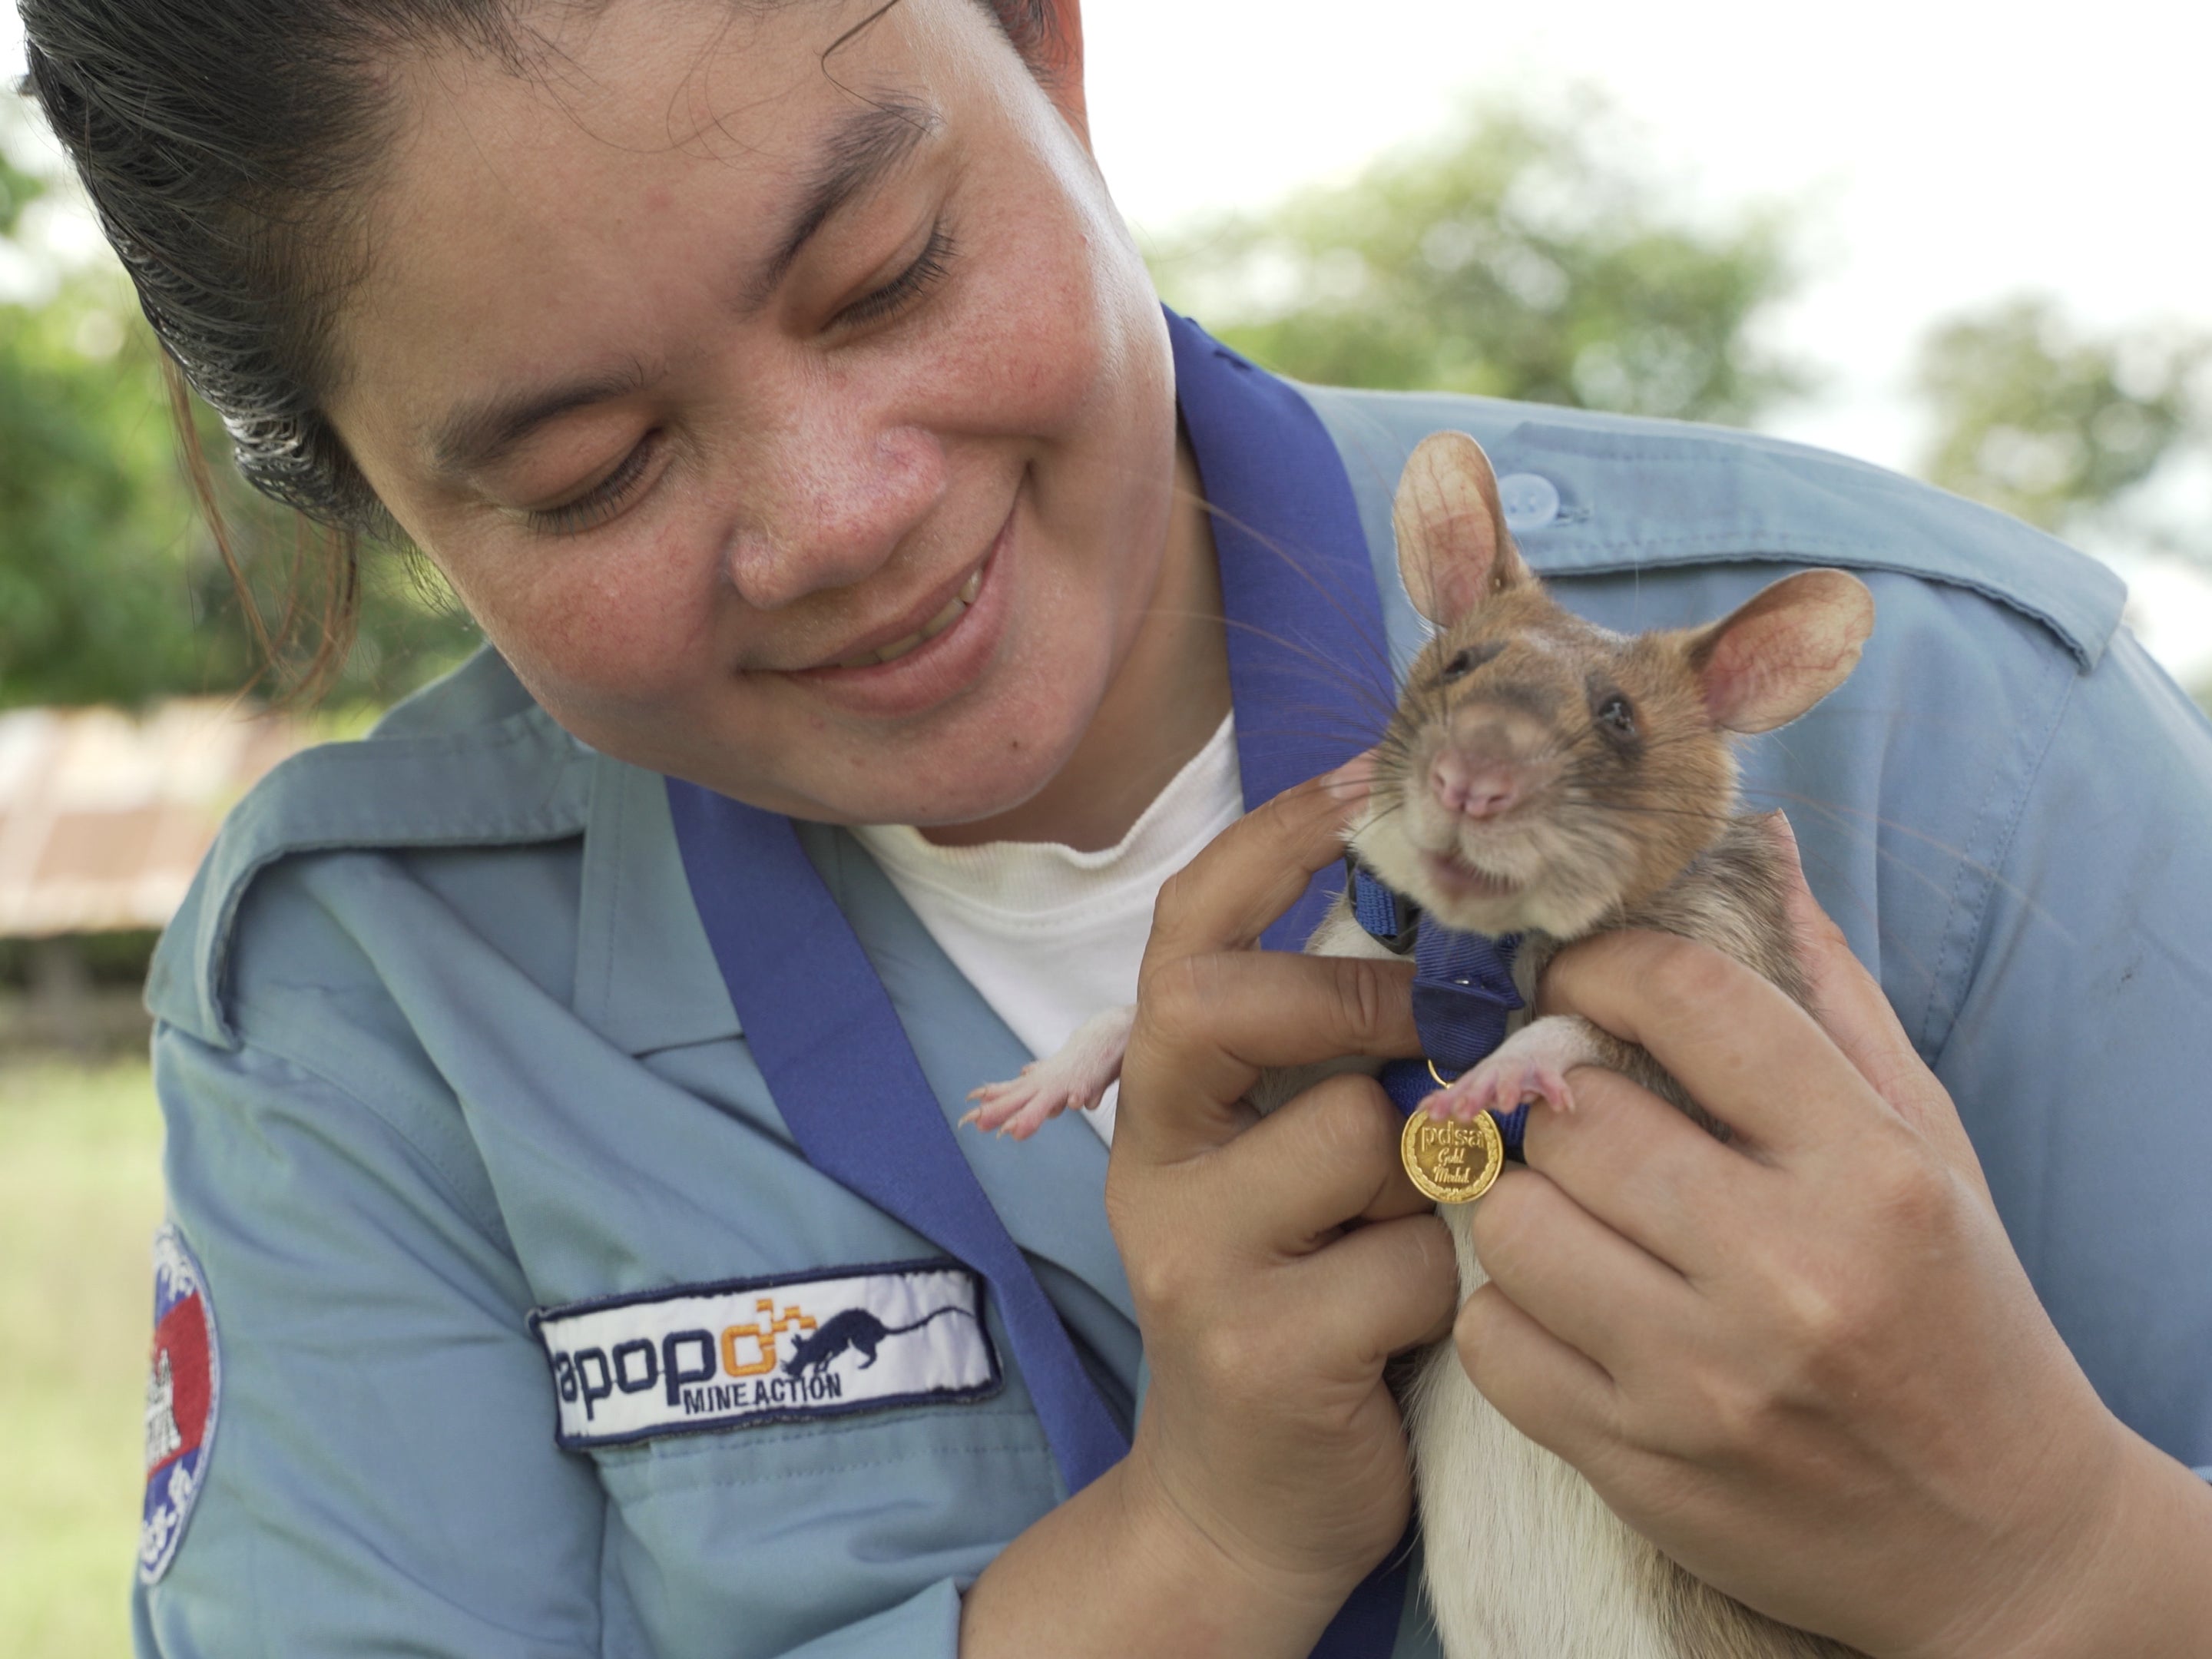 Magawa, a landmine detection rat, receives a miniature PDSA Gold Medal for his work detecting landmines and unexploded ordnance in Cambodia